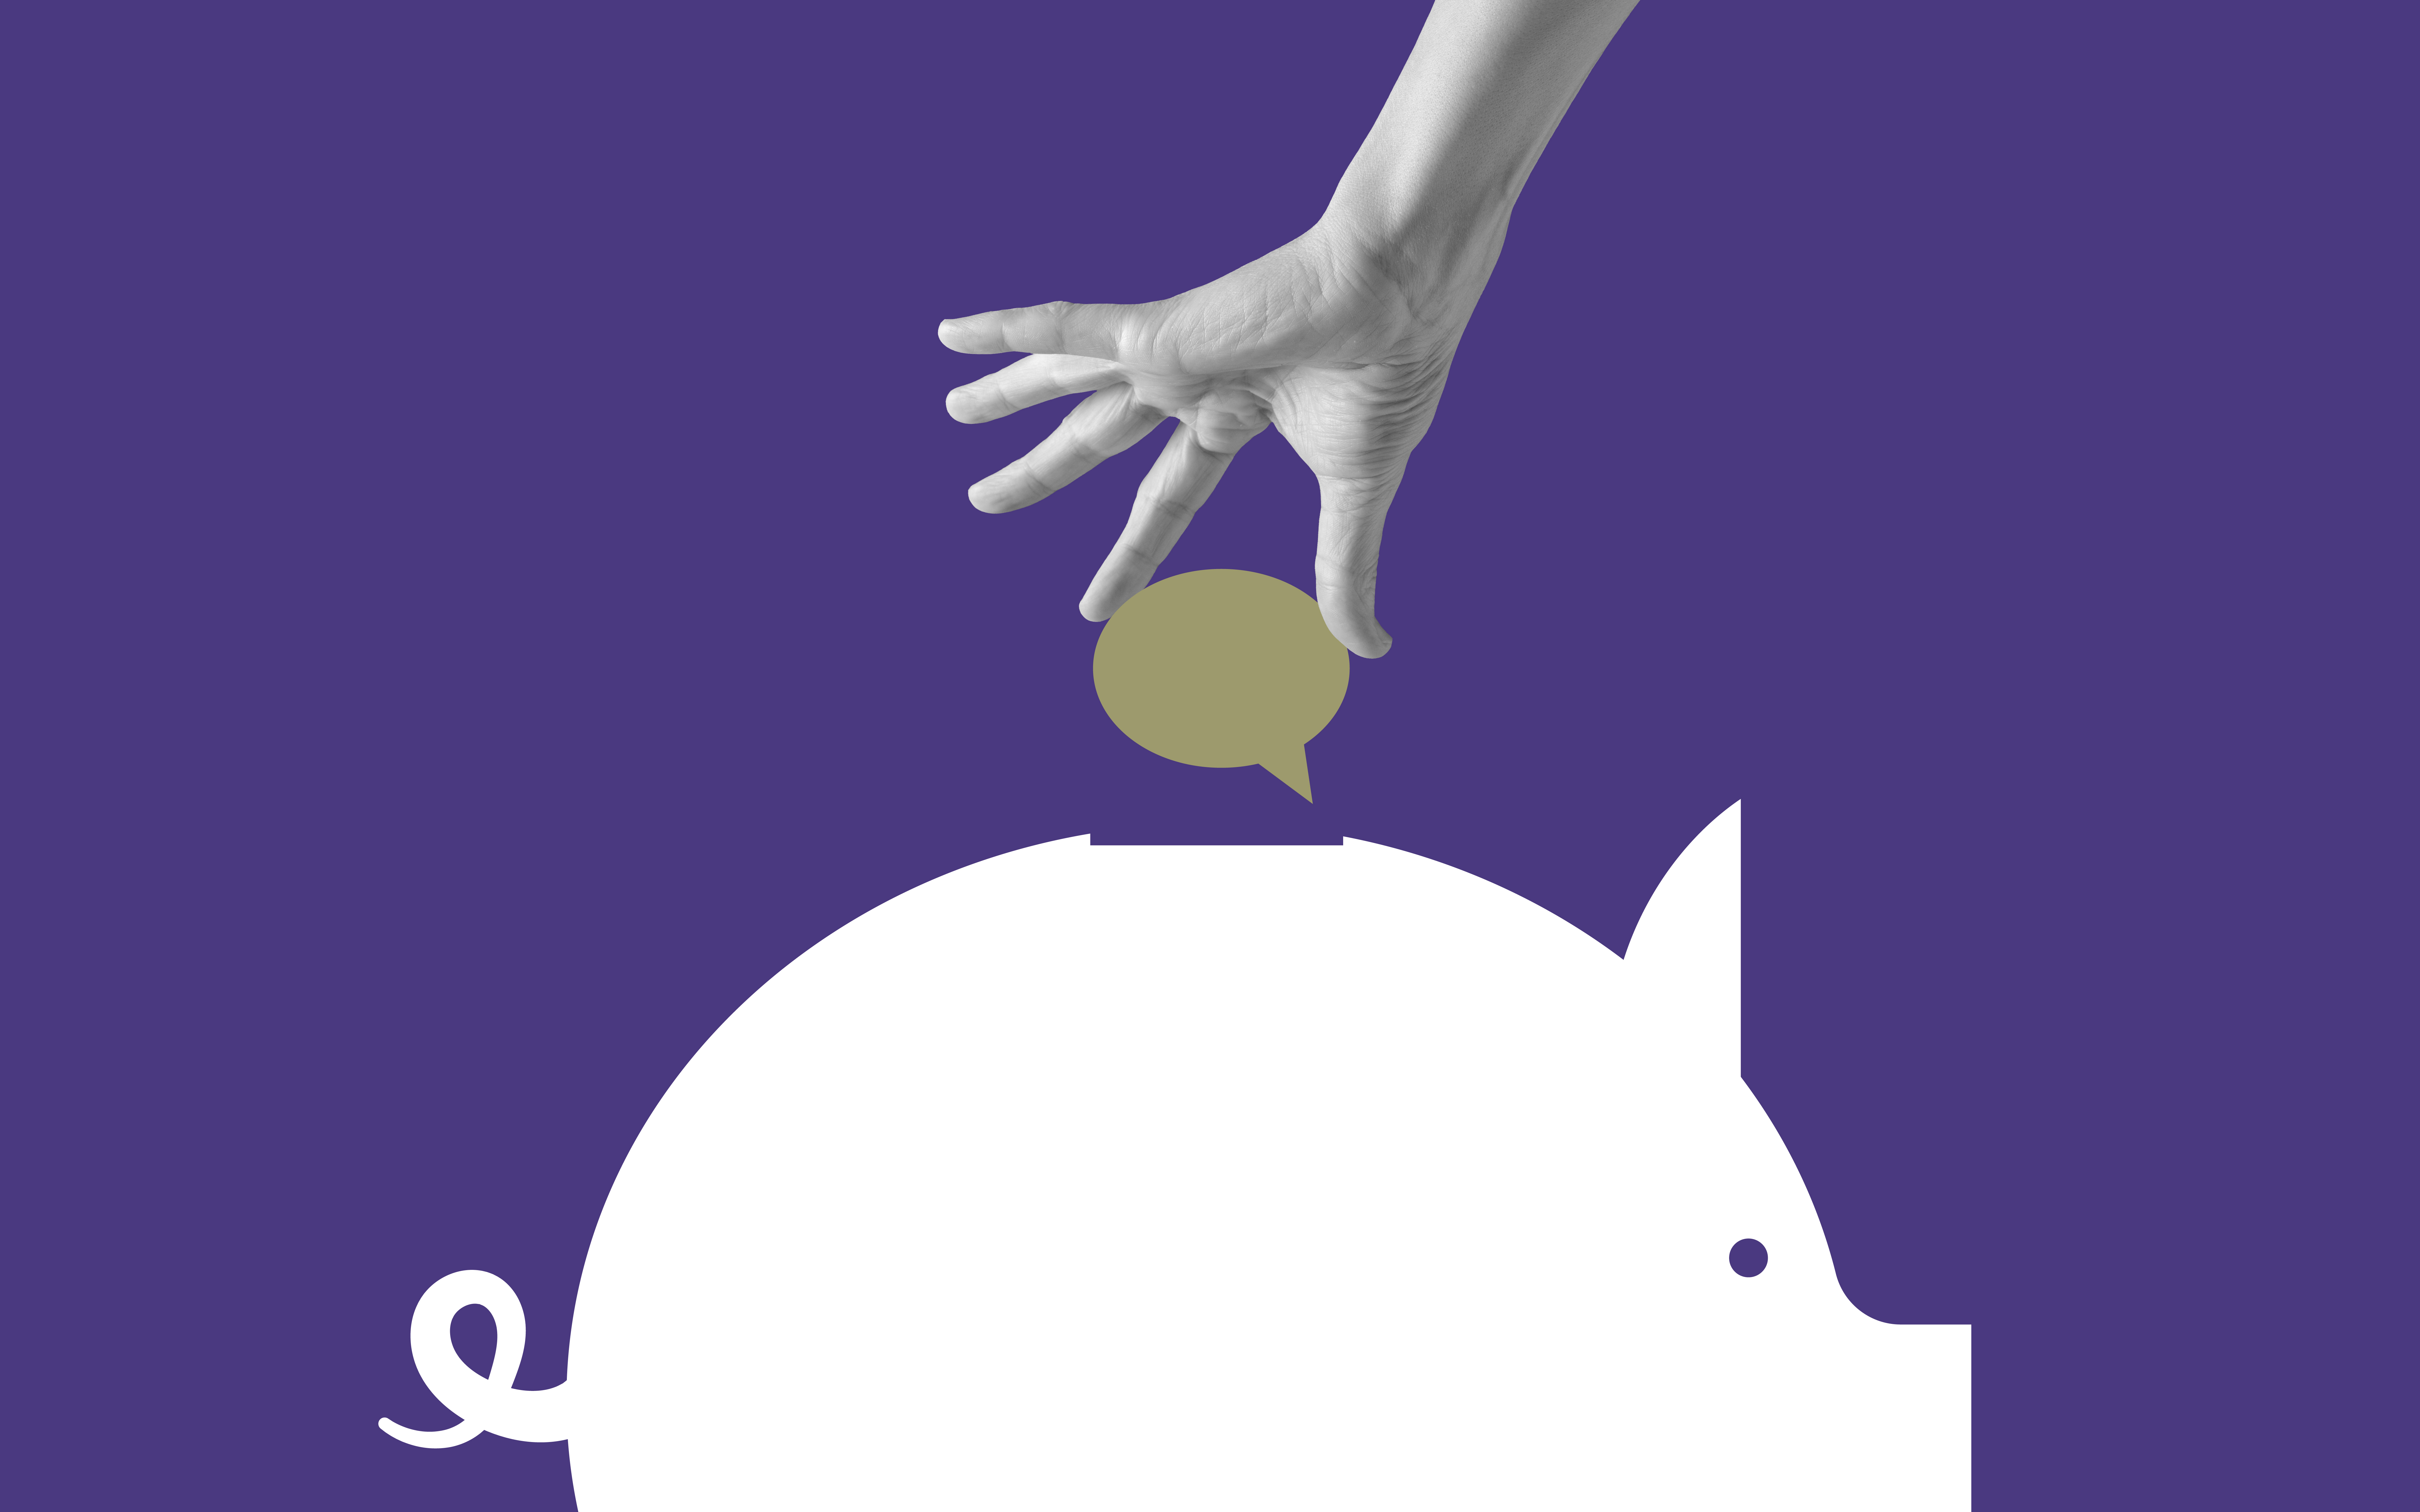 Image of a hand inserting a speech bubble into a white piggy bank against a purple background.